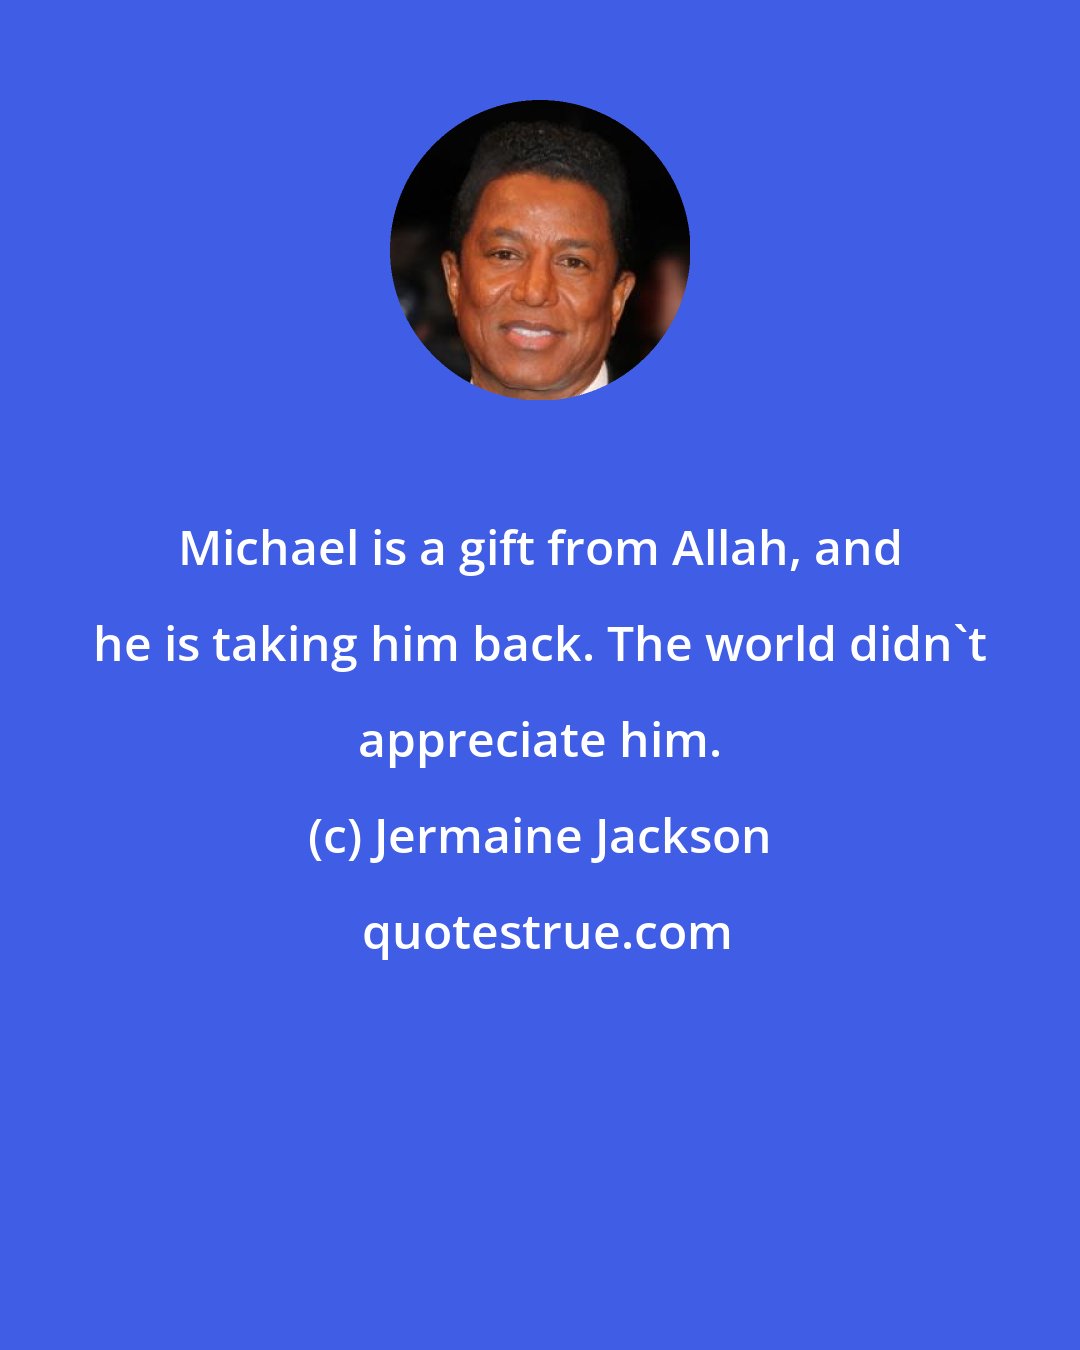 Jermaine Jackson: Michael is a gift from Allah, and he is taking him back. The world didn't appreciate him.